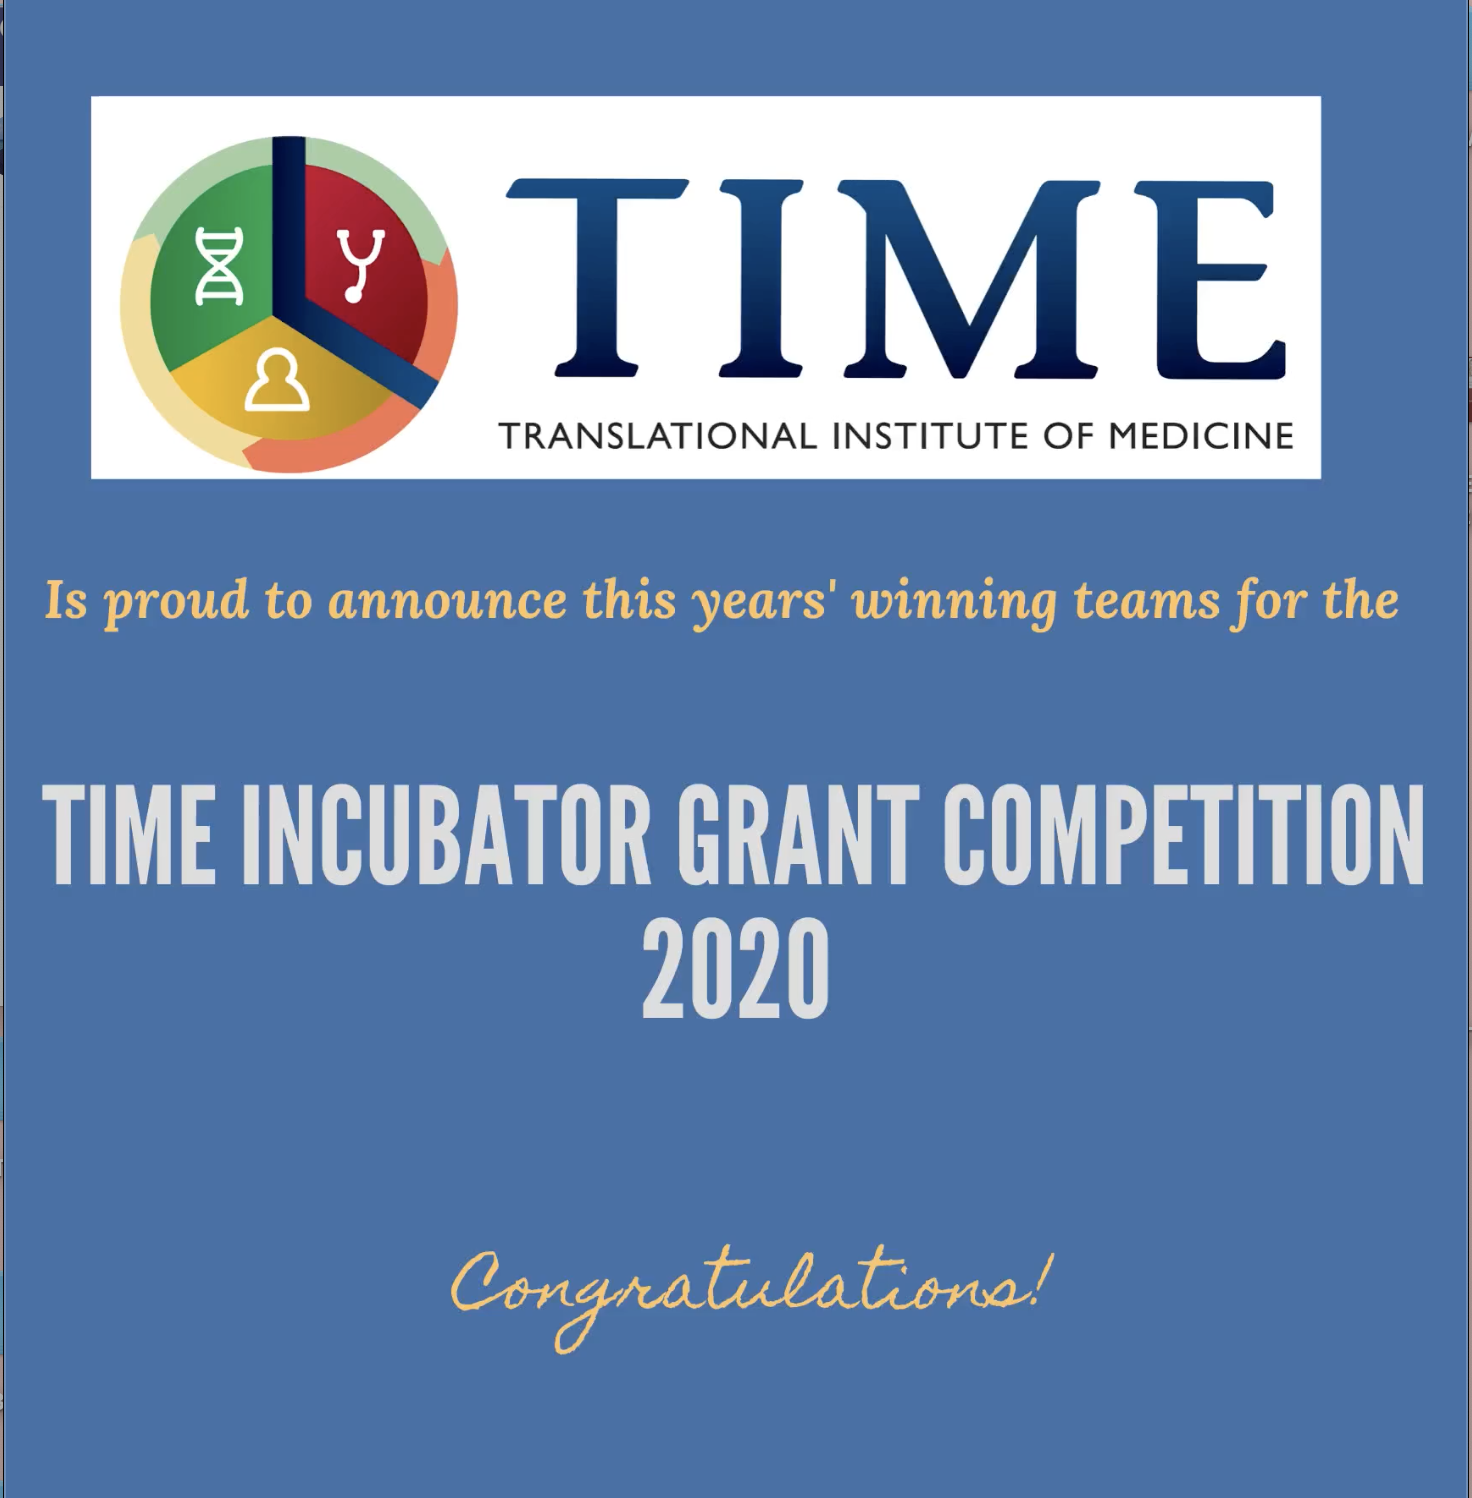 Announcement for TIME Incubator grant 2020nnouncement for TIME Incubator grant 2020 winning teams 